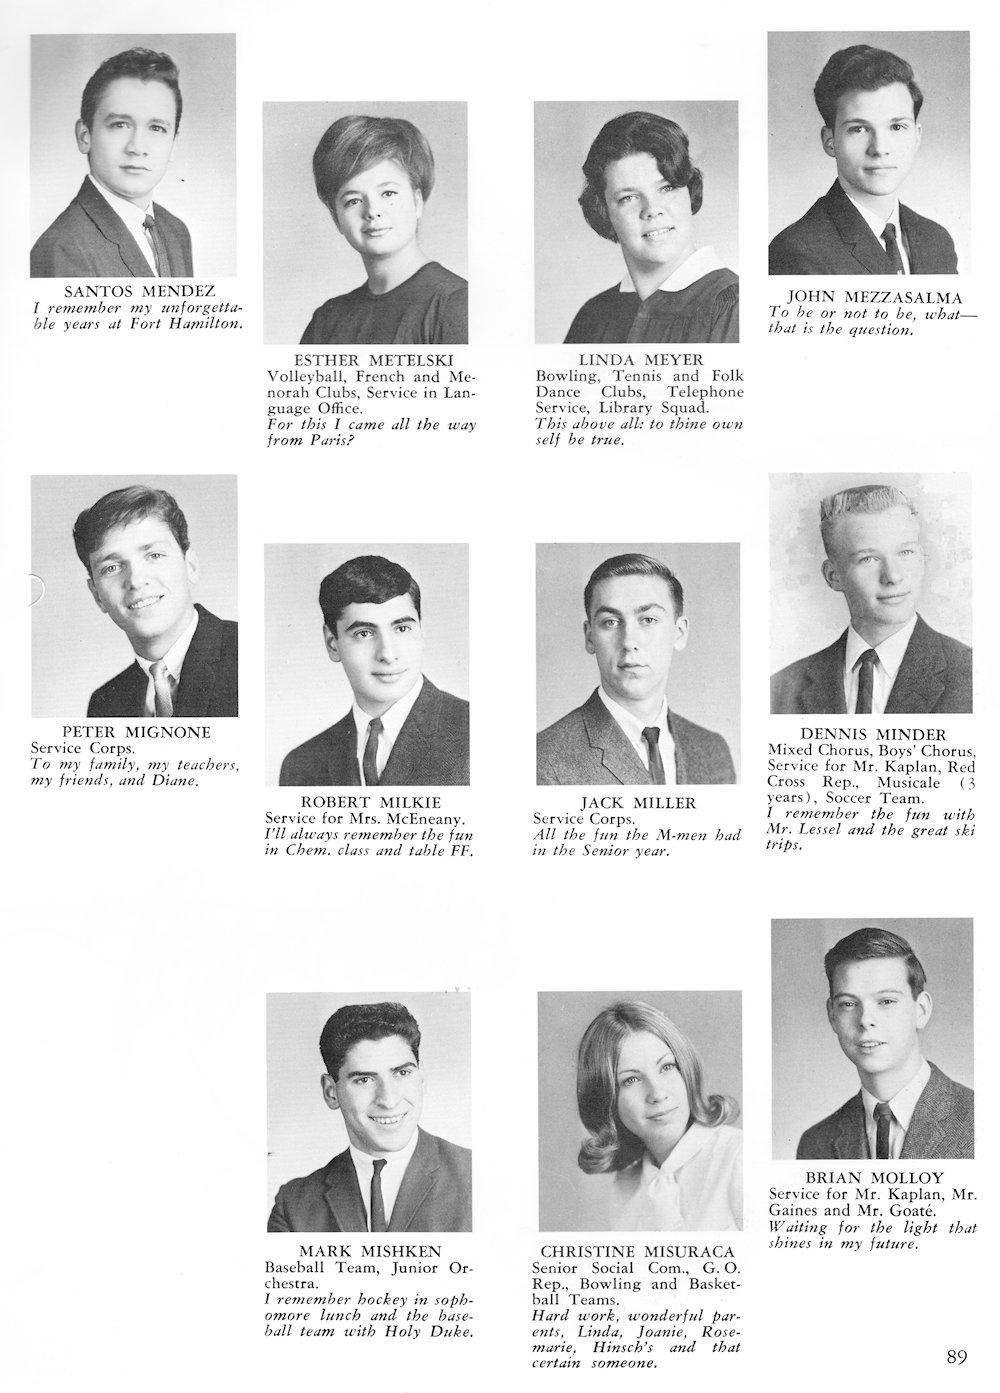 Mendez-Molloy page from Fort Hamilton High School 1965